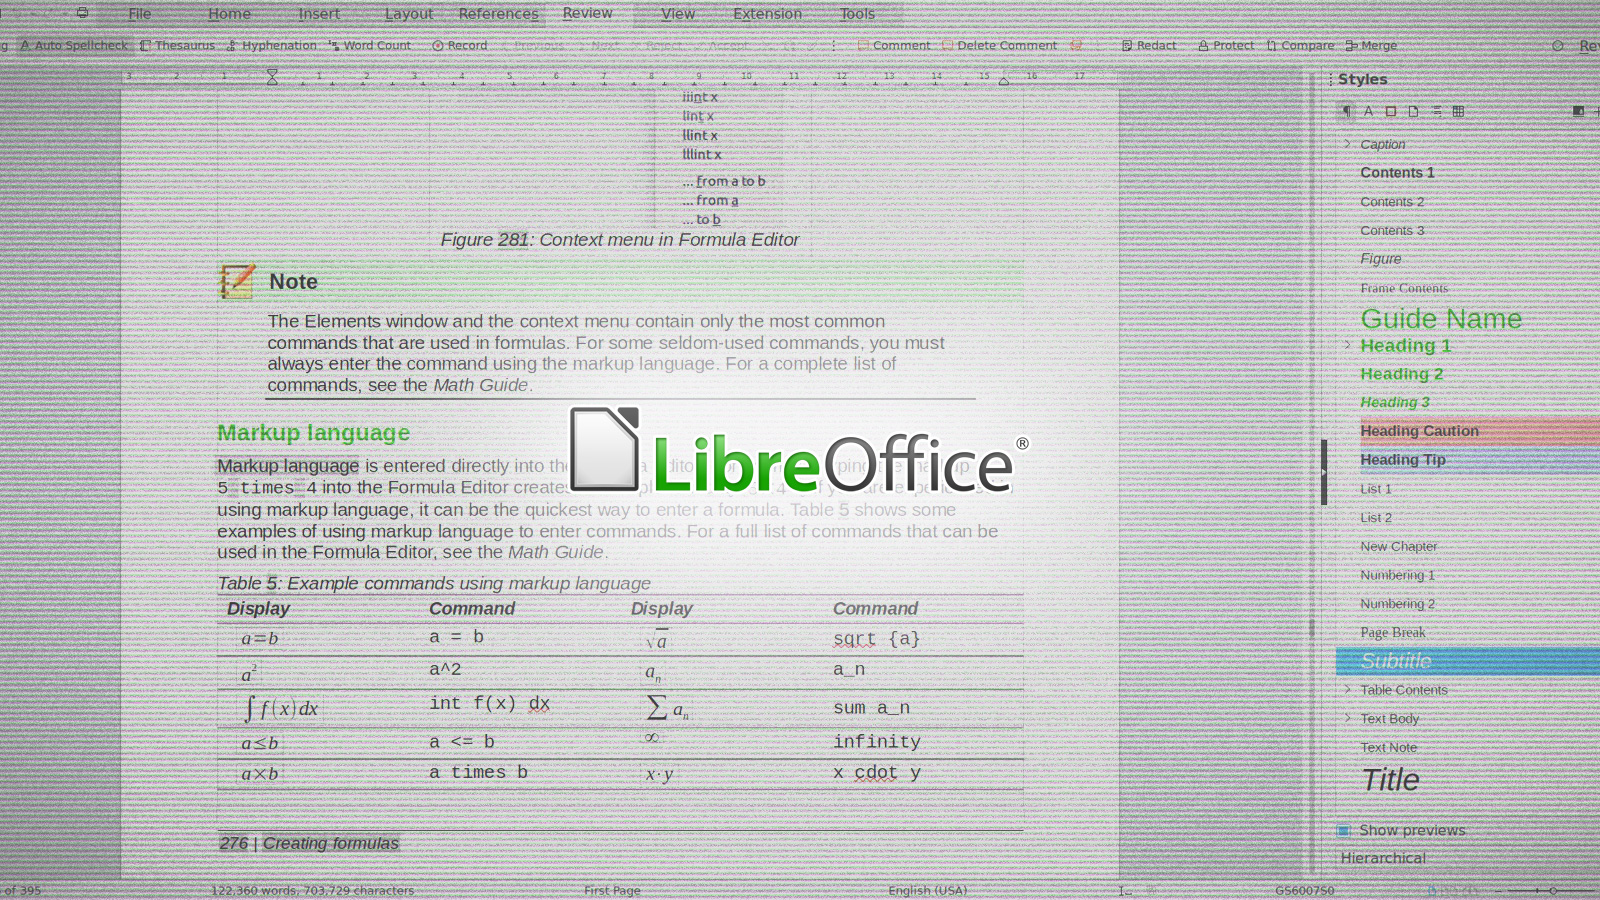 LibreOffice addresses security issues with macros, passwords